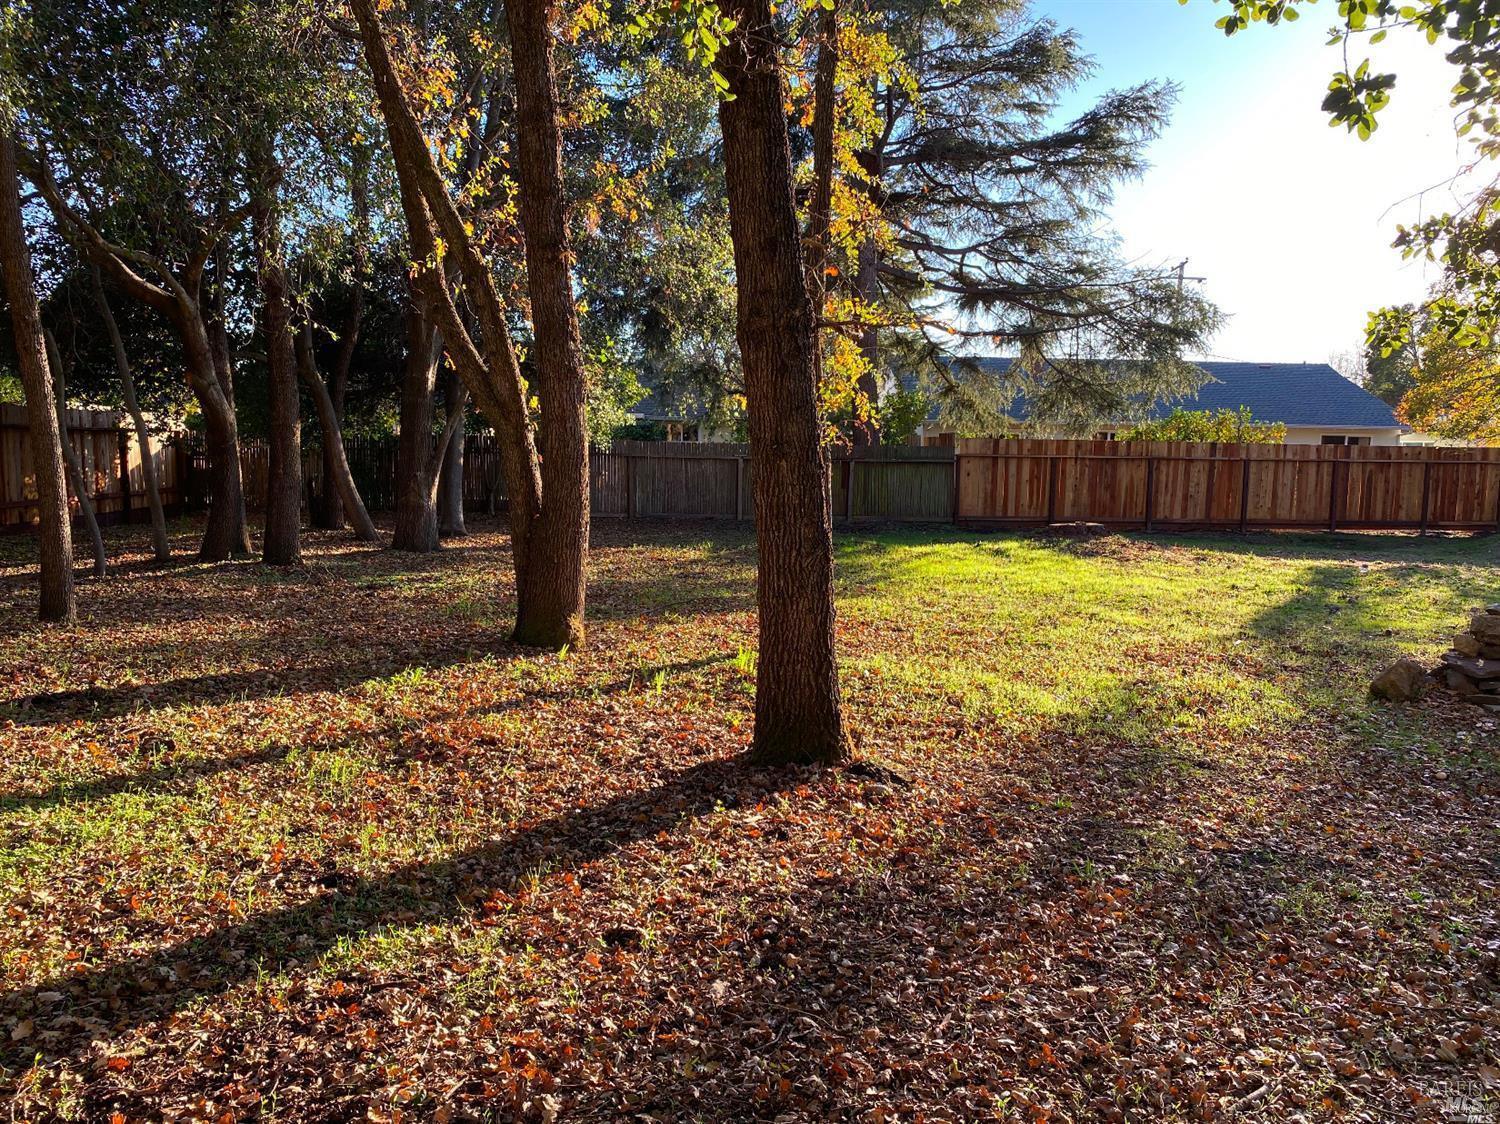 Your own secret garden awaits! Private, large, tucked away buildable lot in downtown Eastside Sonoma. Flag lot not fully visible from the street with exceptionable peace and quiet. All the advantages of being close to the Plaza in the desirable upscale Eastside. Build your dream!